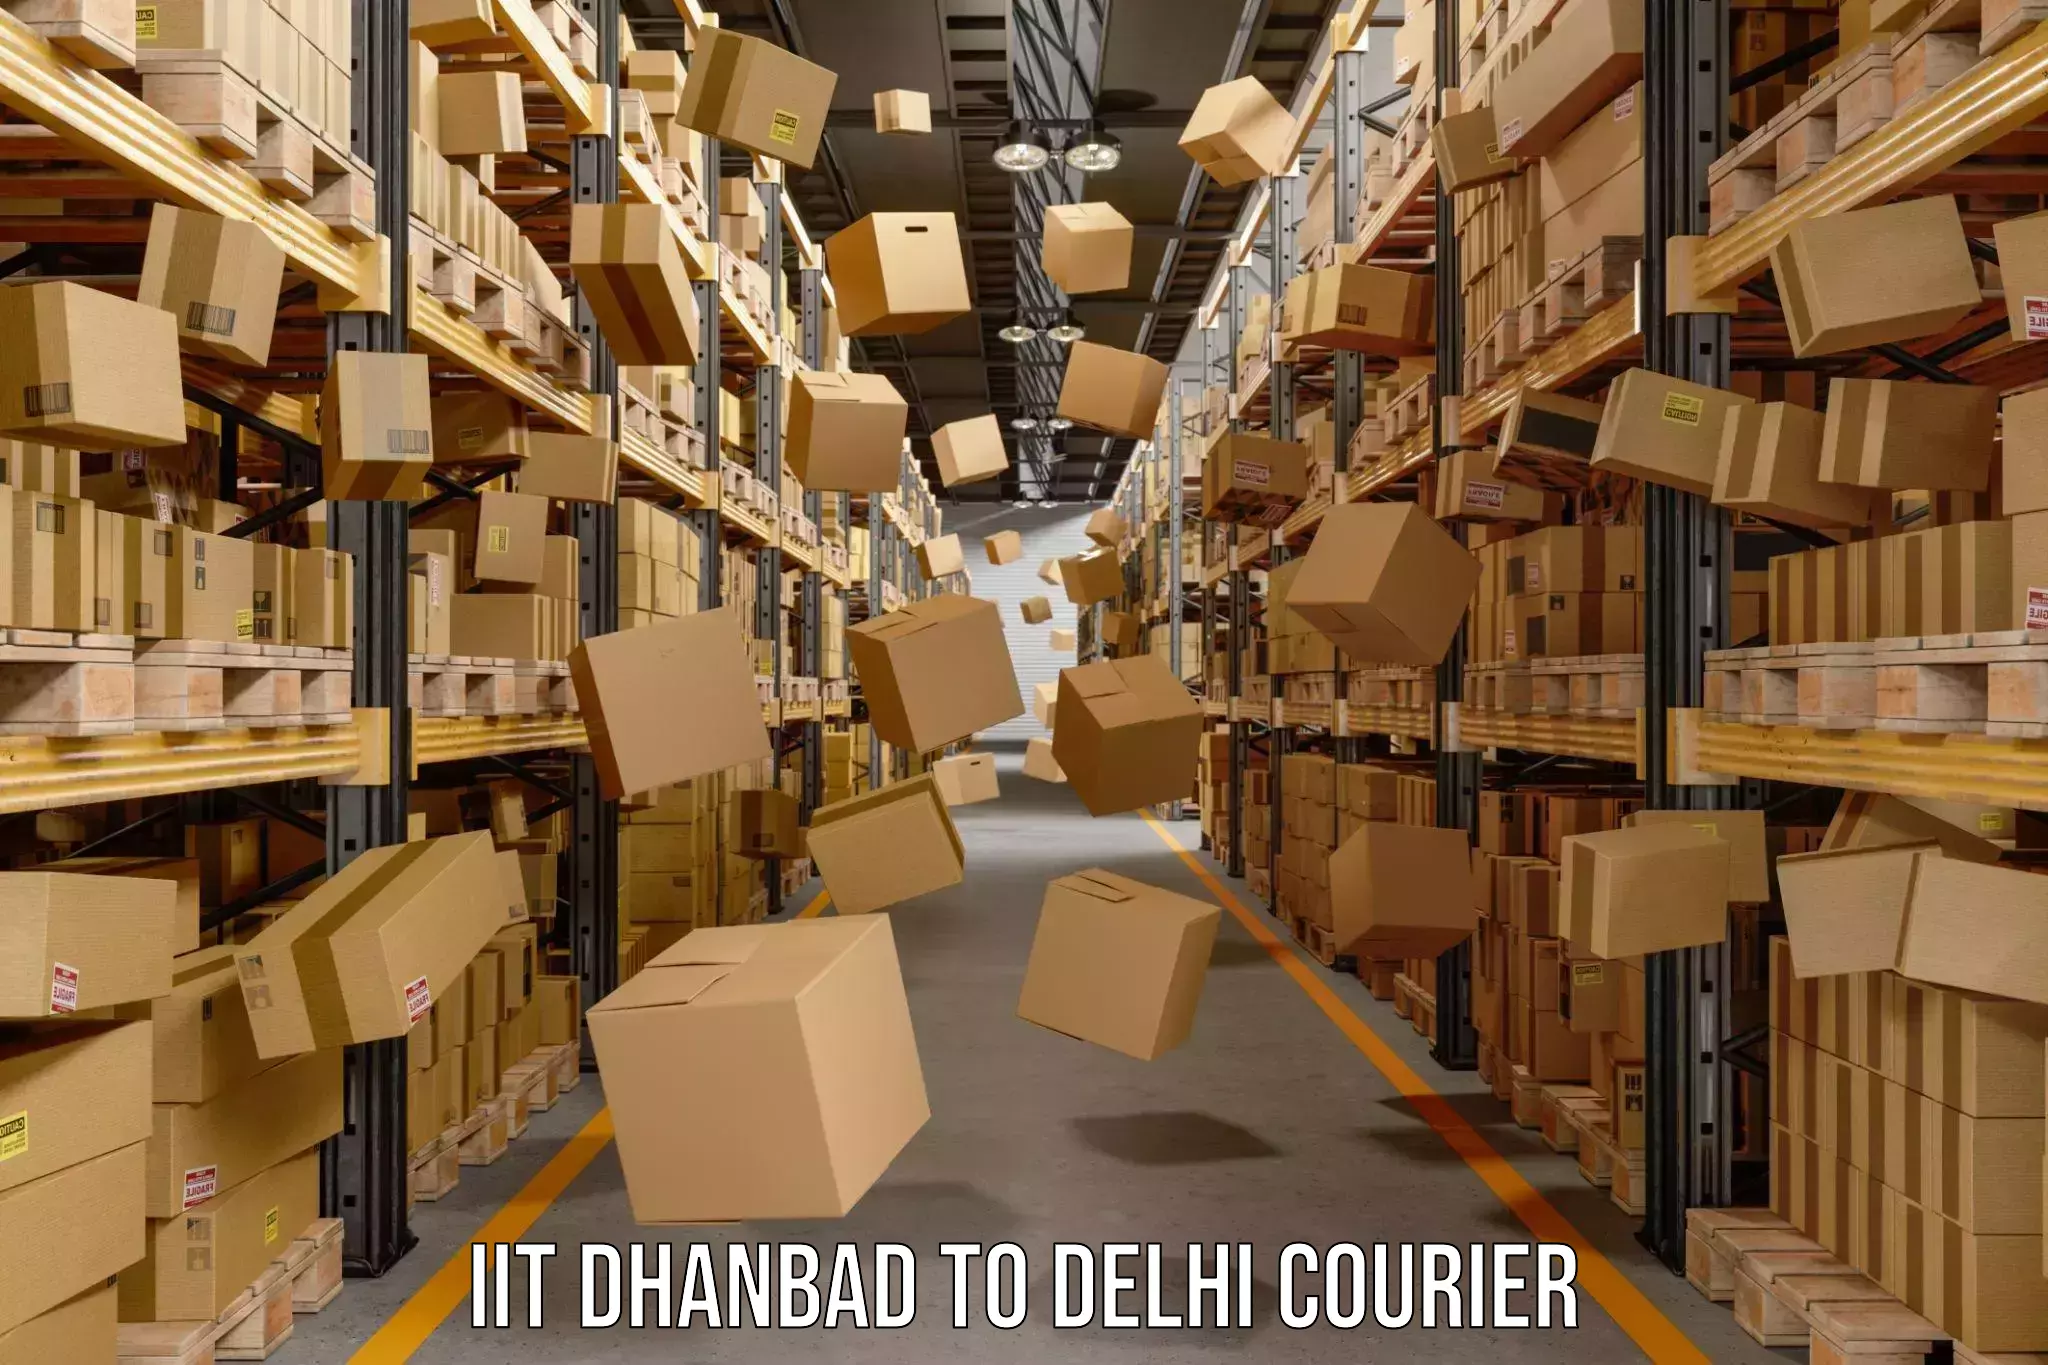 Next-day delivery options IIT Dhanbad to University of Delhi